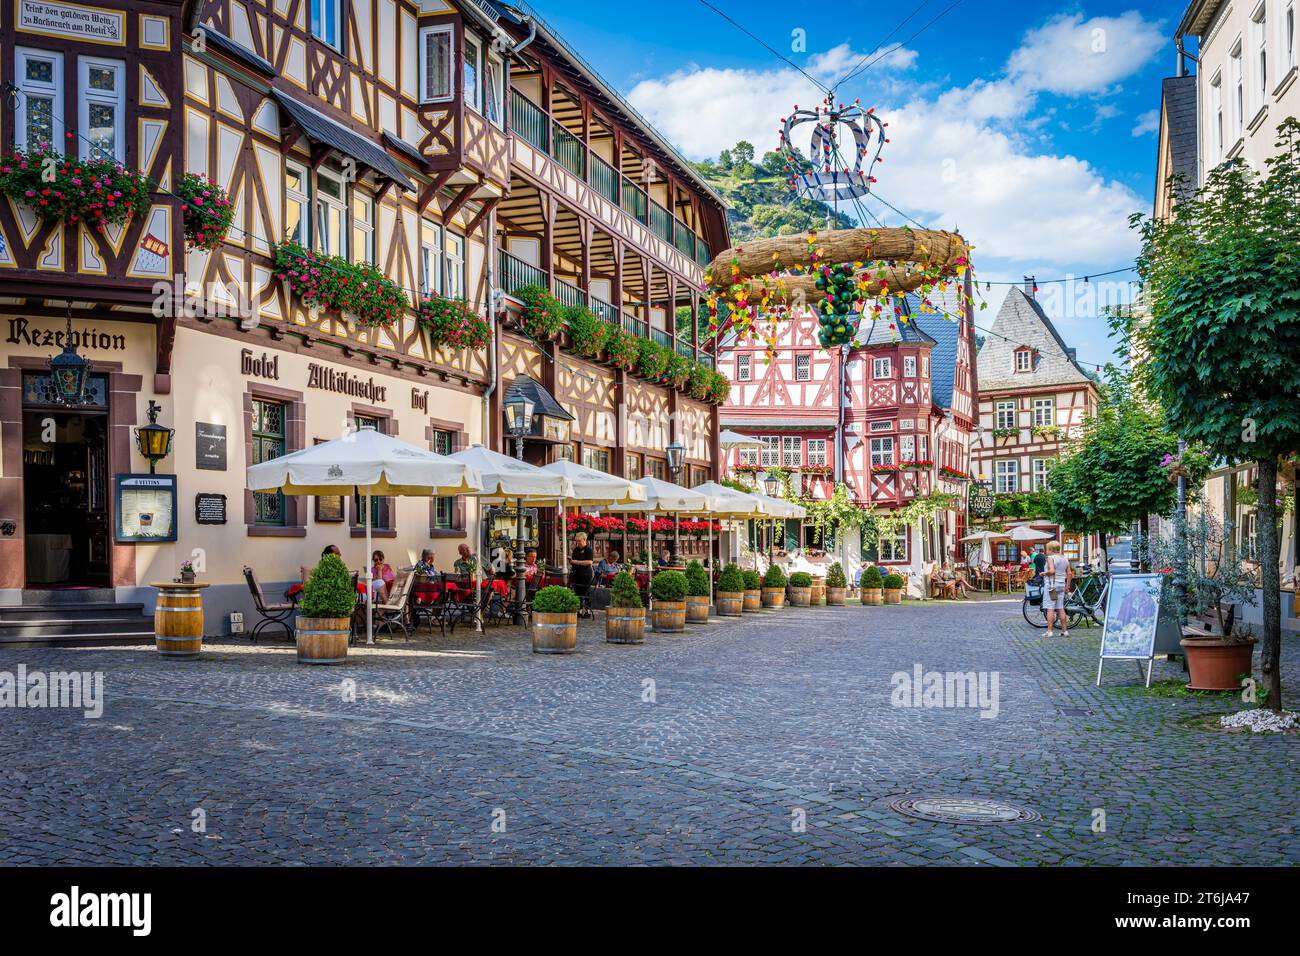 City of Bacharach on the Middle Rhine, old half-timbered houses in the core city, 'Altkölnischer Hof' and 'Altes Haus'. Stock Photo